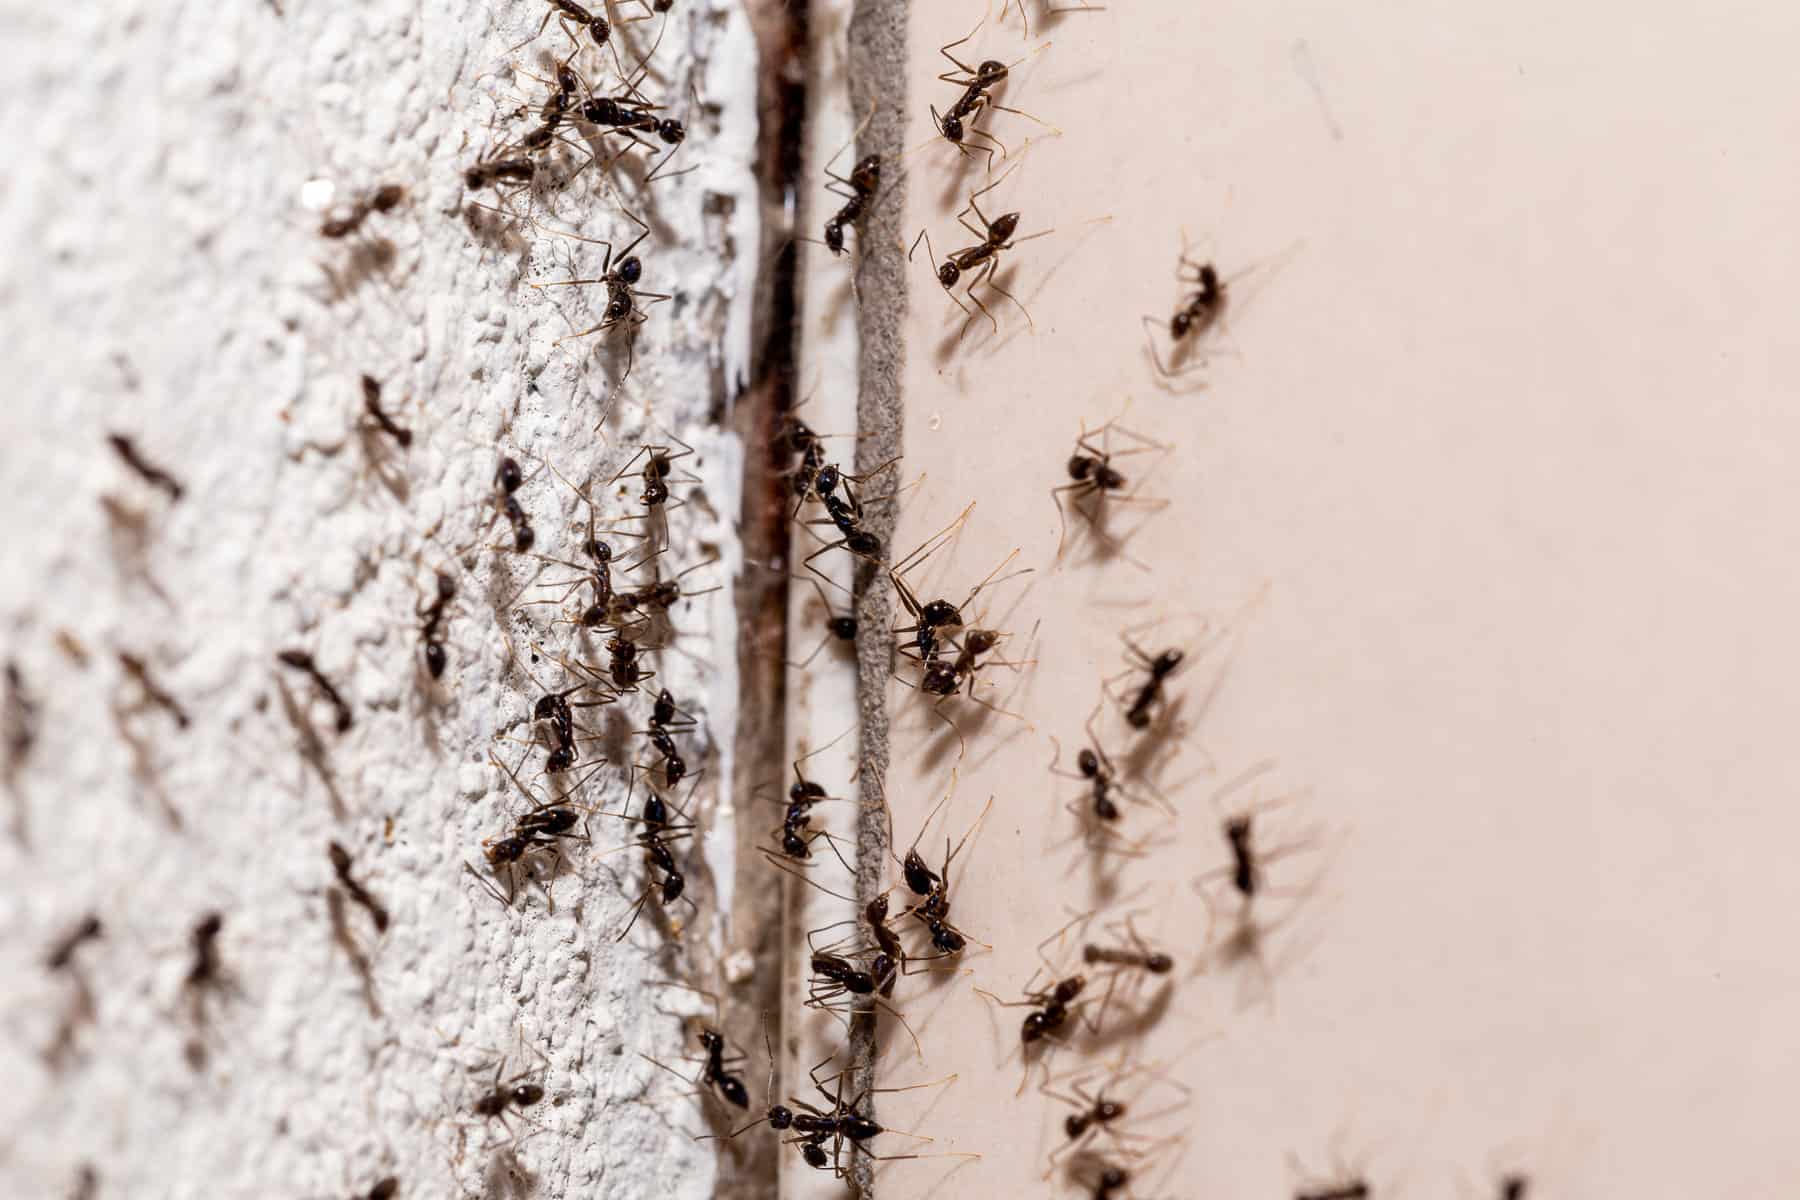 bugs on the wall, coming out through crack in the wall, sweet ant infestation indoors